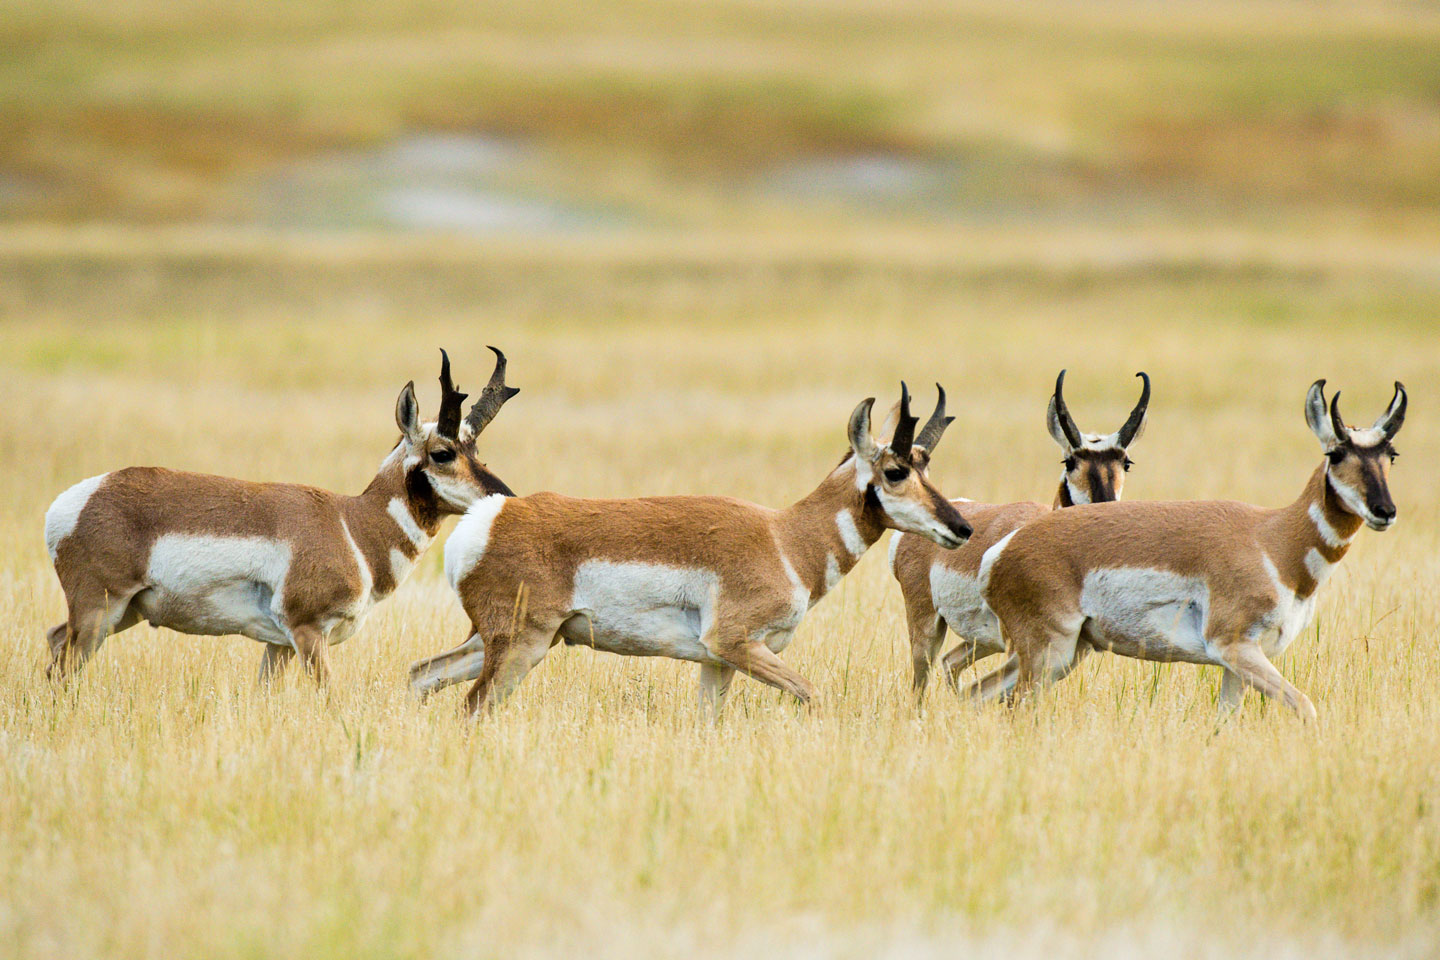 Male pronghorn antelope with horns traveling across grassland.